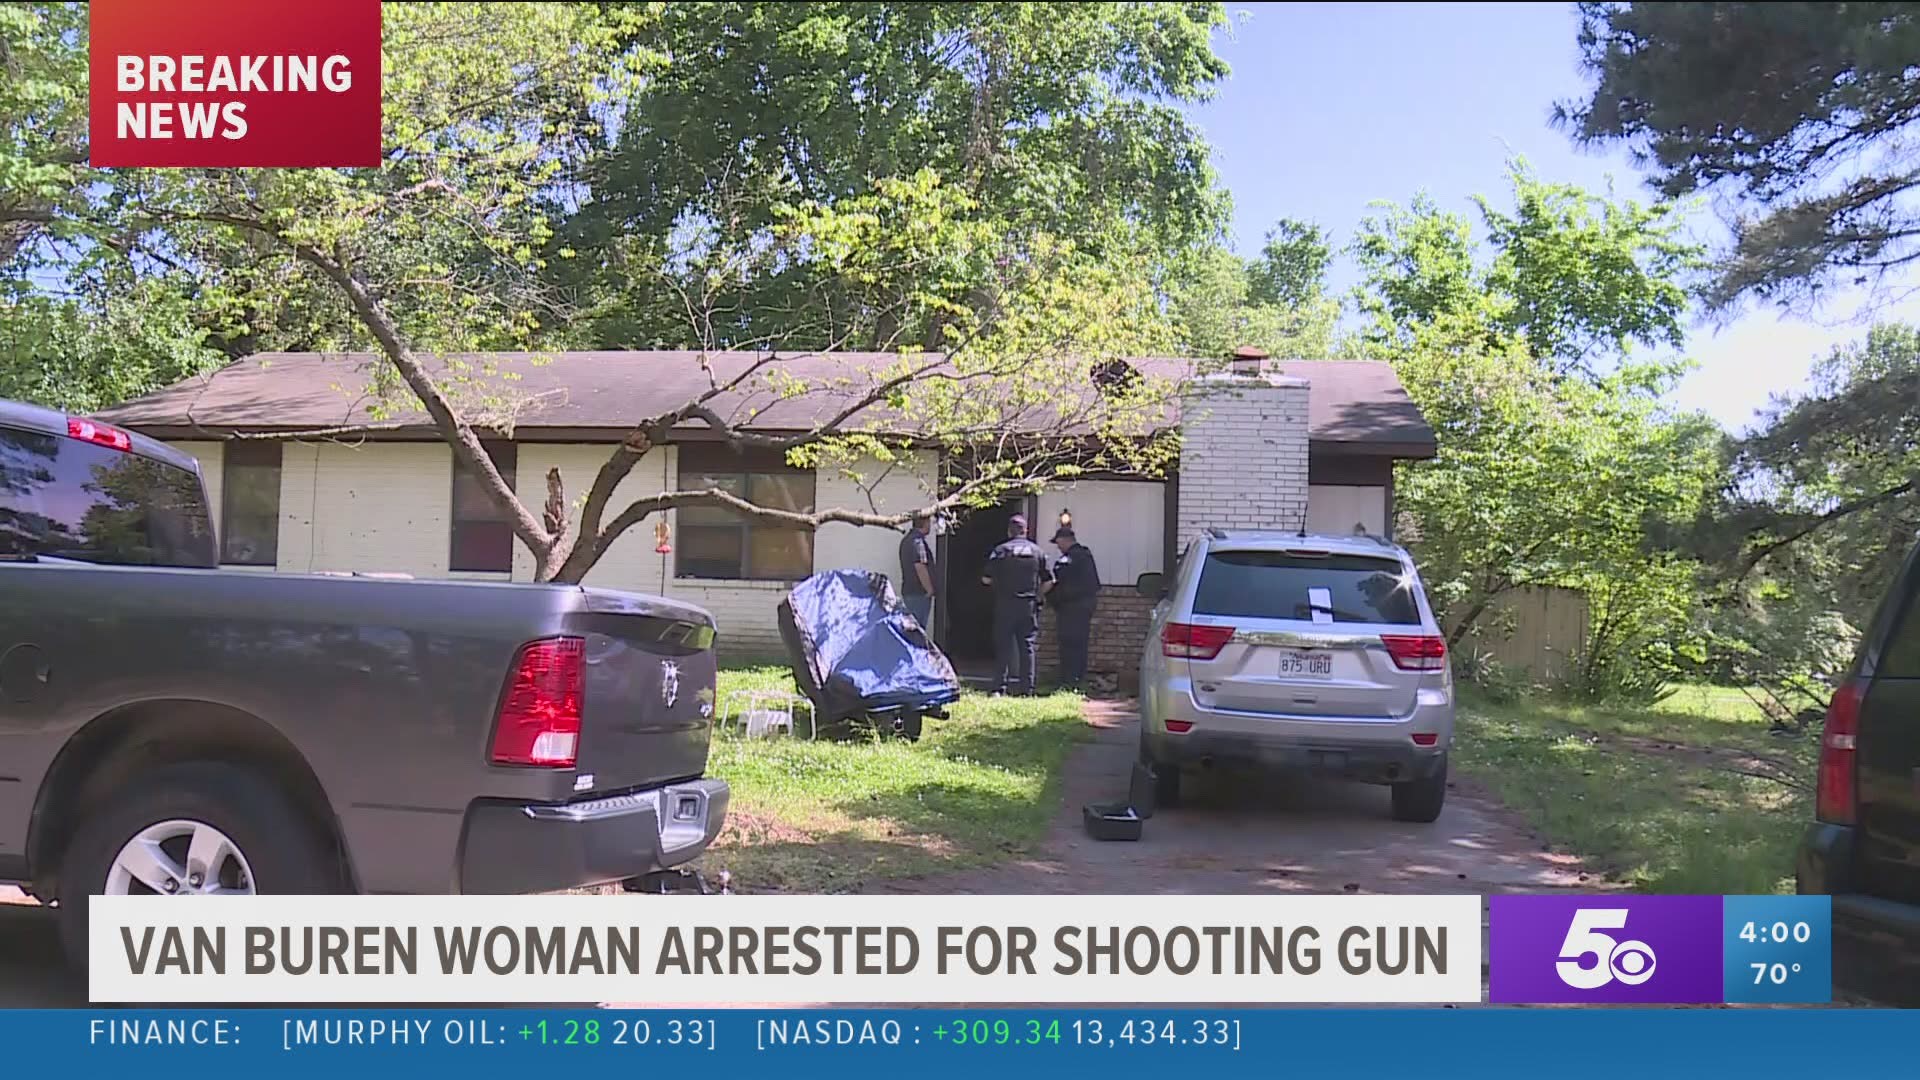 A woman in her late 40s has been arrested this afternoon (May 14) for shooting a gun into the ground in Van Buren.